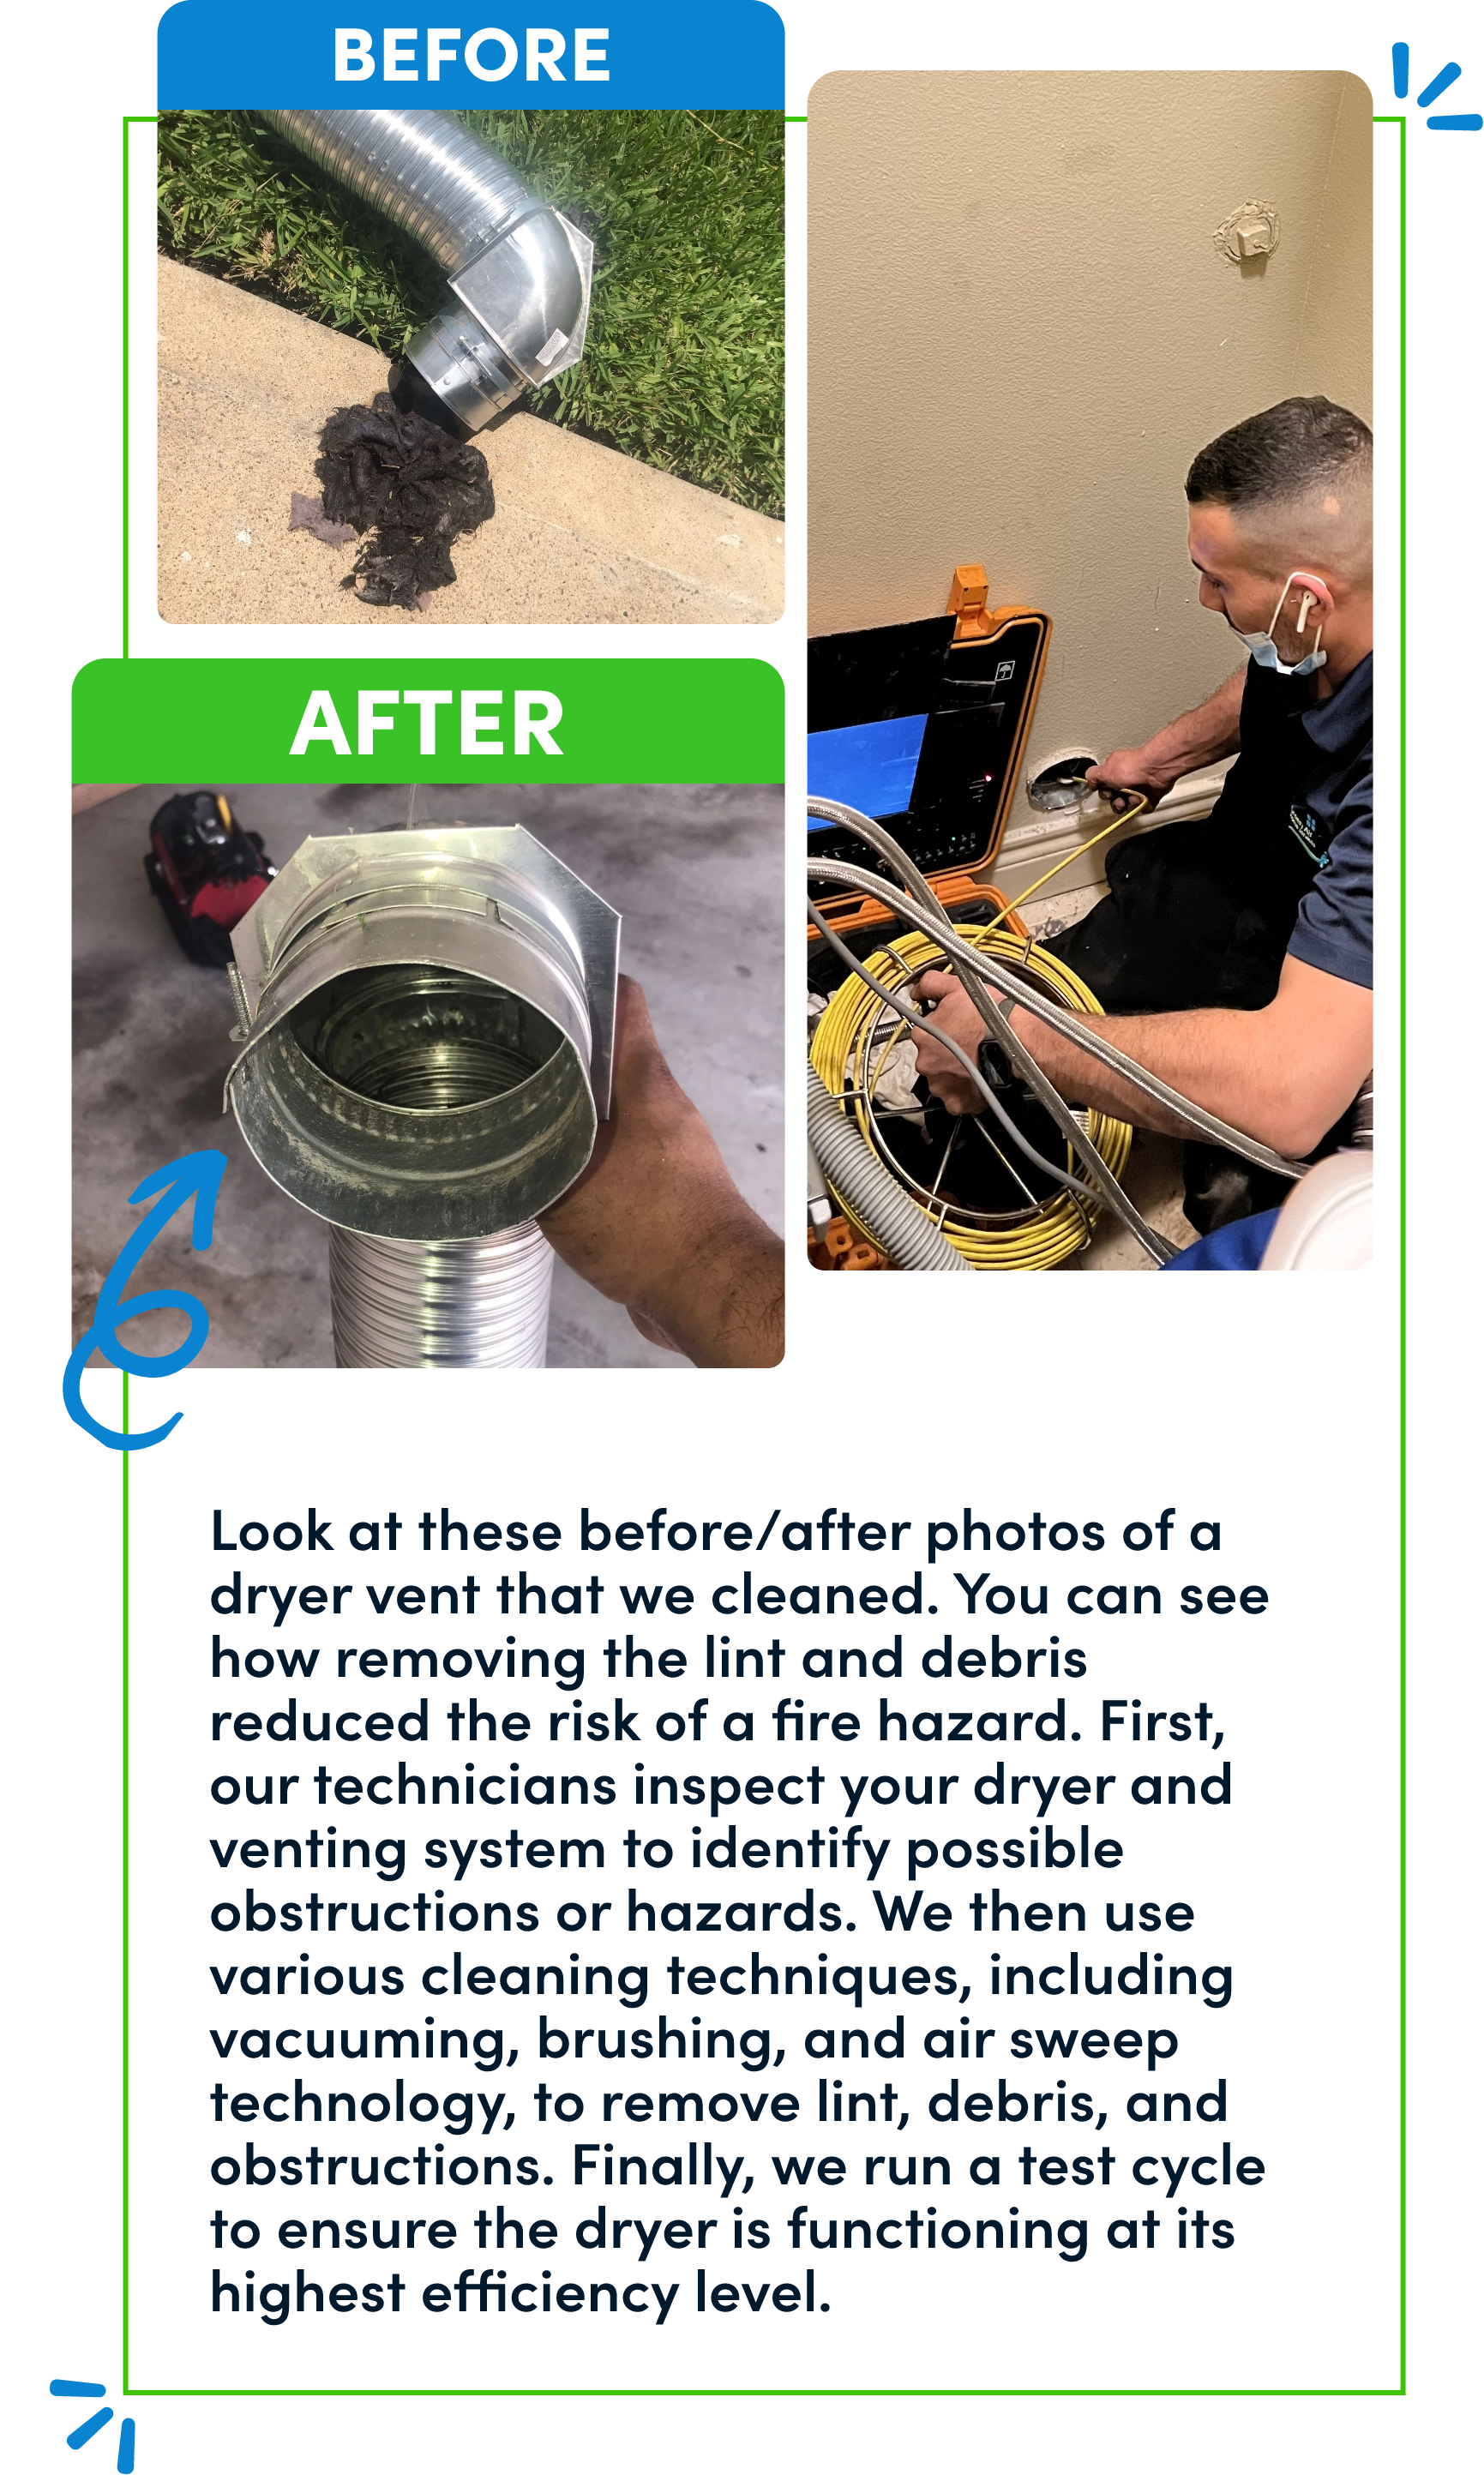 Clean & Green Air Duct Cleaning's certified technicians use advanced equipment and techniques to deliver top-quality dryer vent cleaning services in Dallas-Fort Worth, Houston, and Austin TX